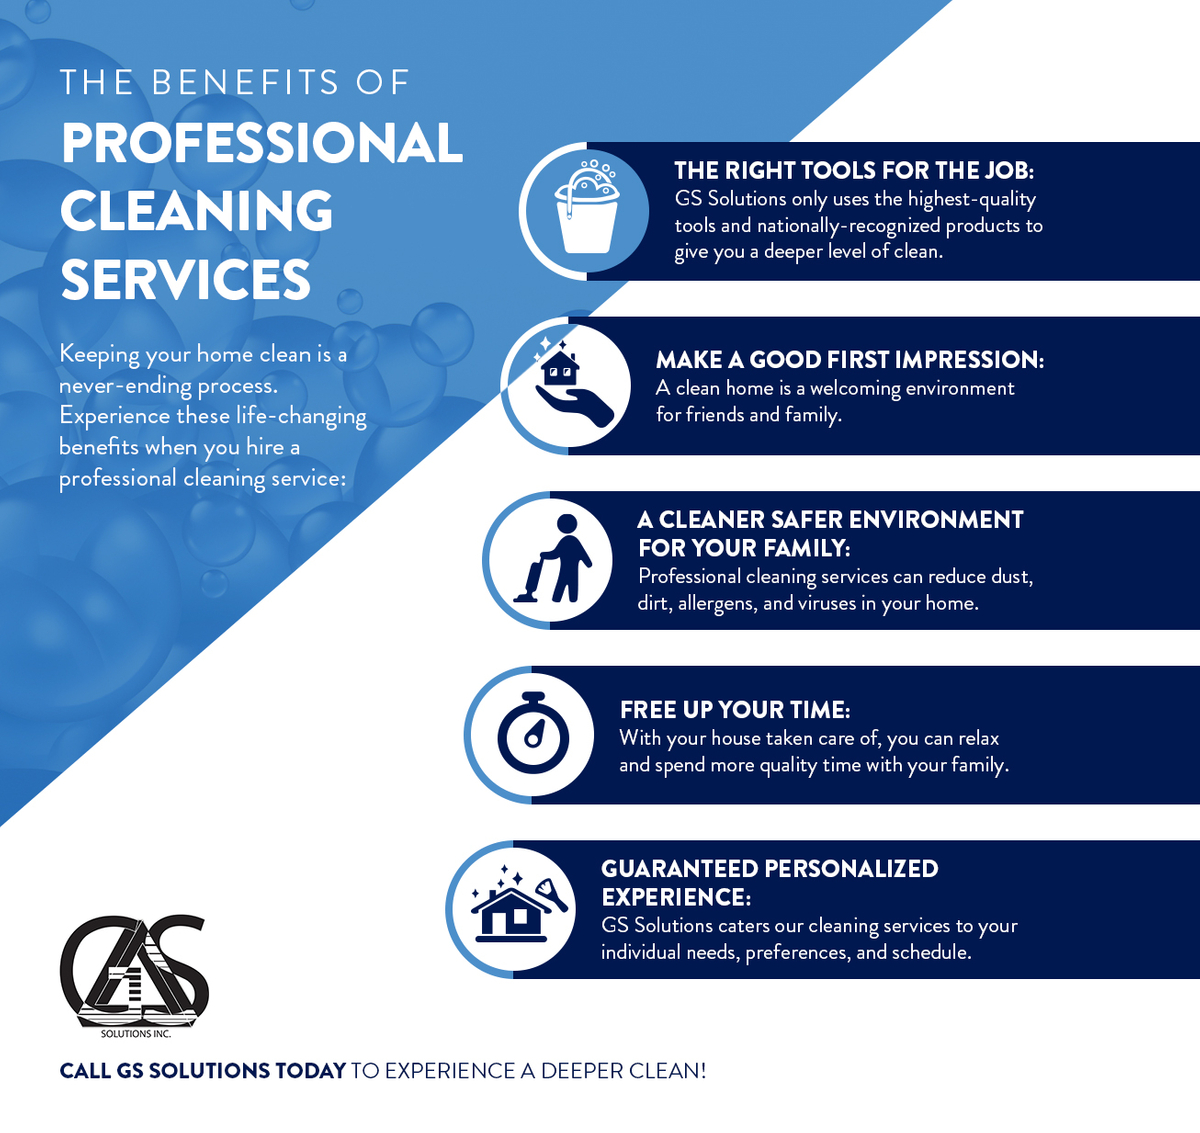 The Benefits of Professional Cleaning.jpg